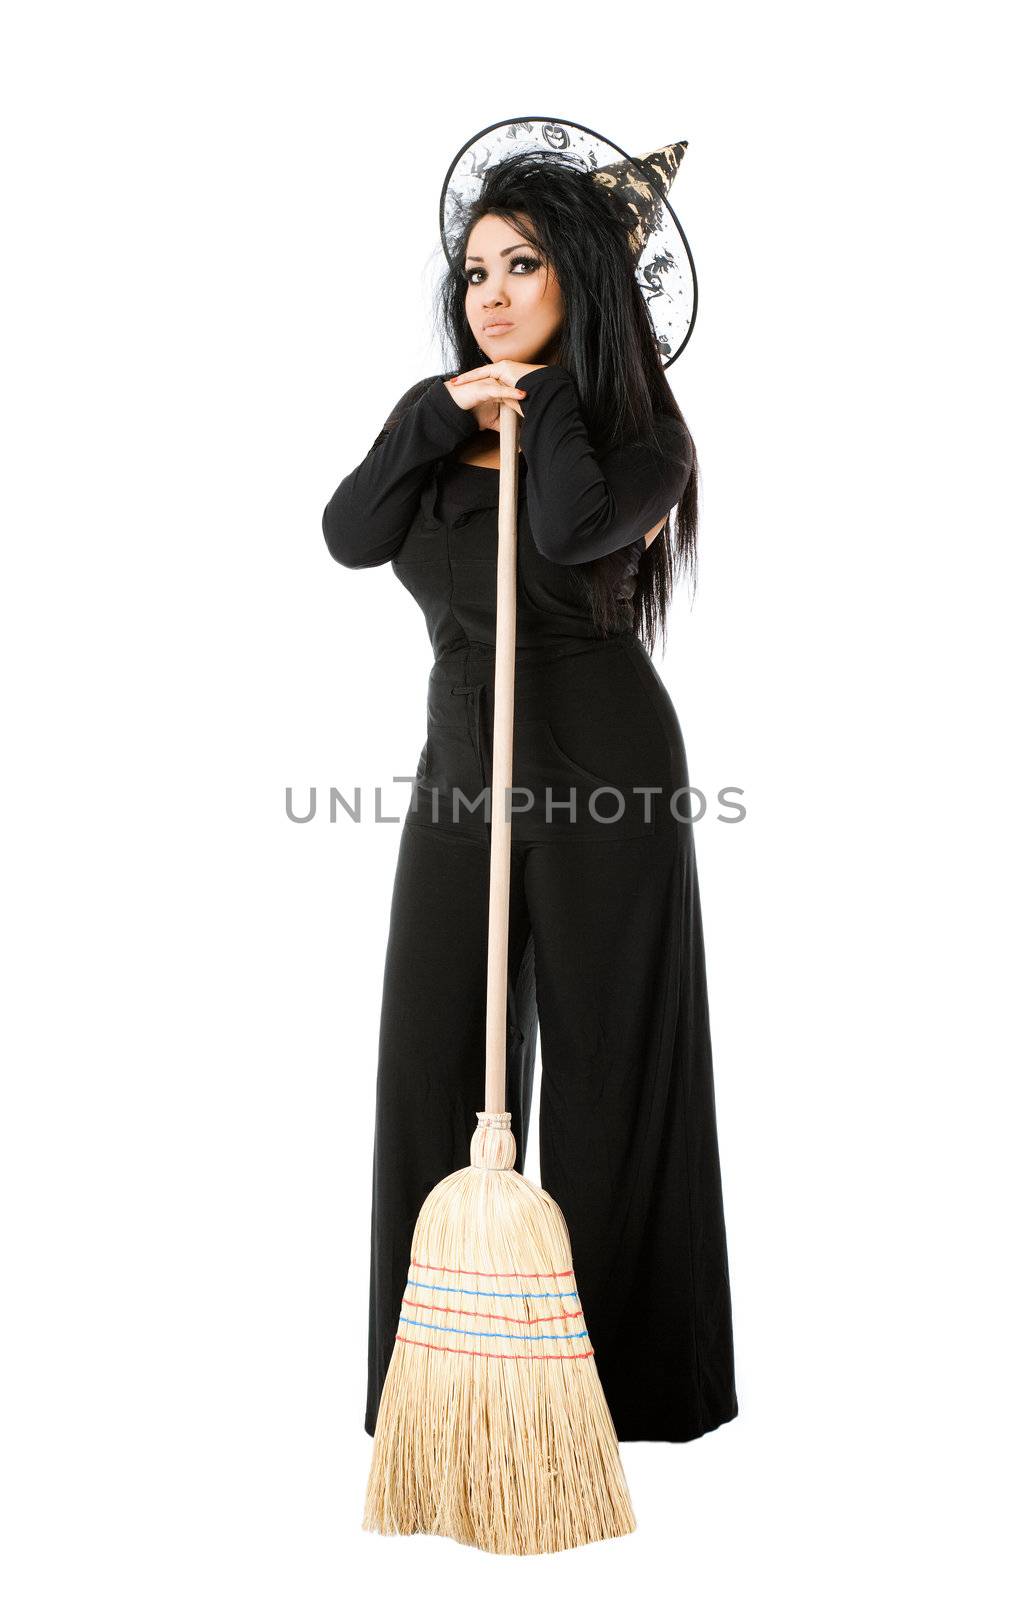 Young female with witch costume standing on white background, leaning on broom